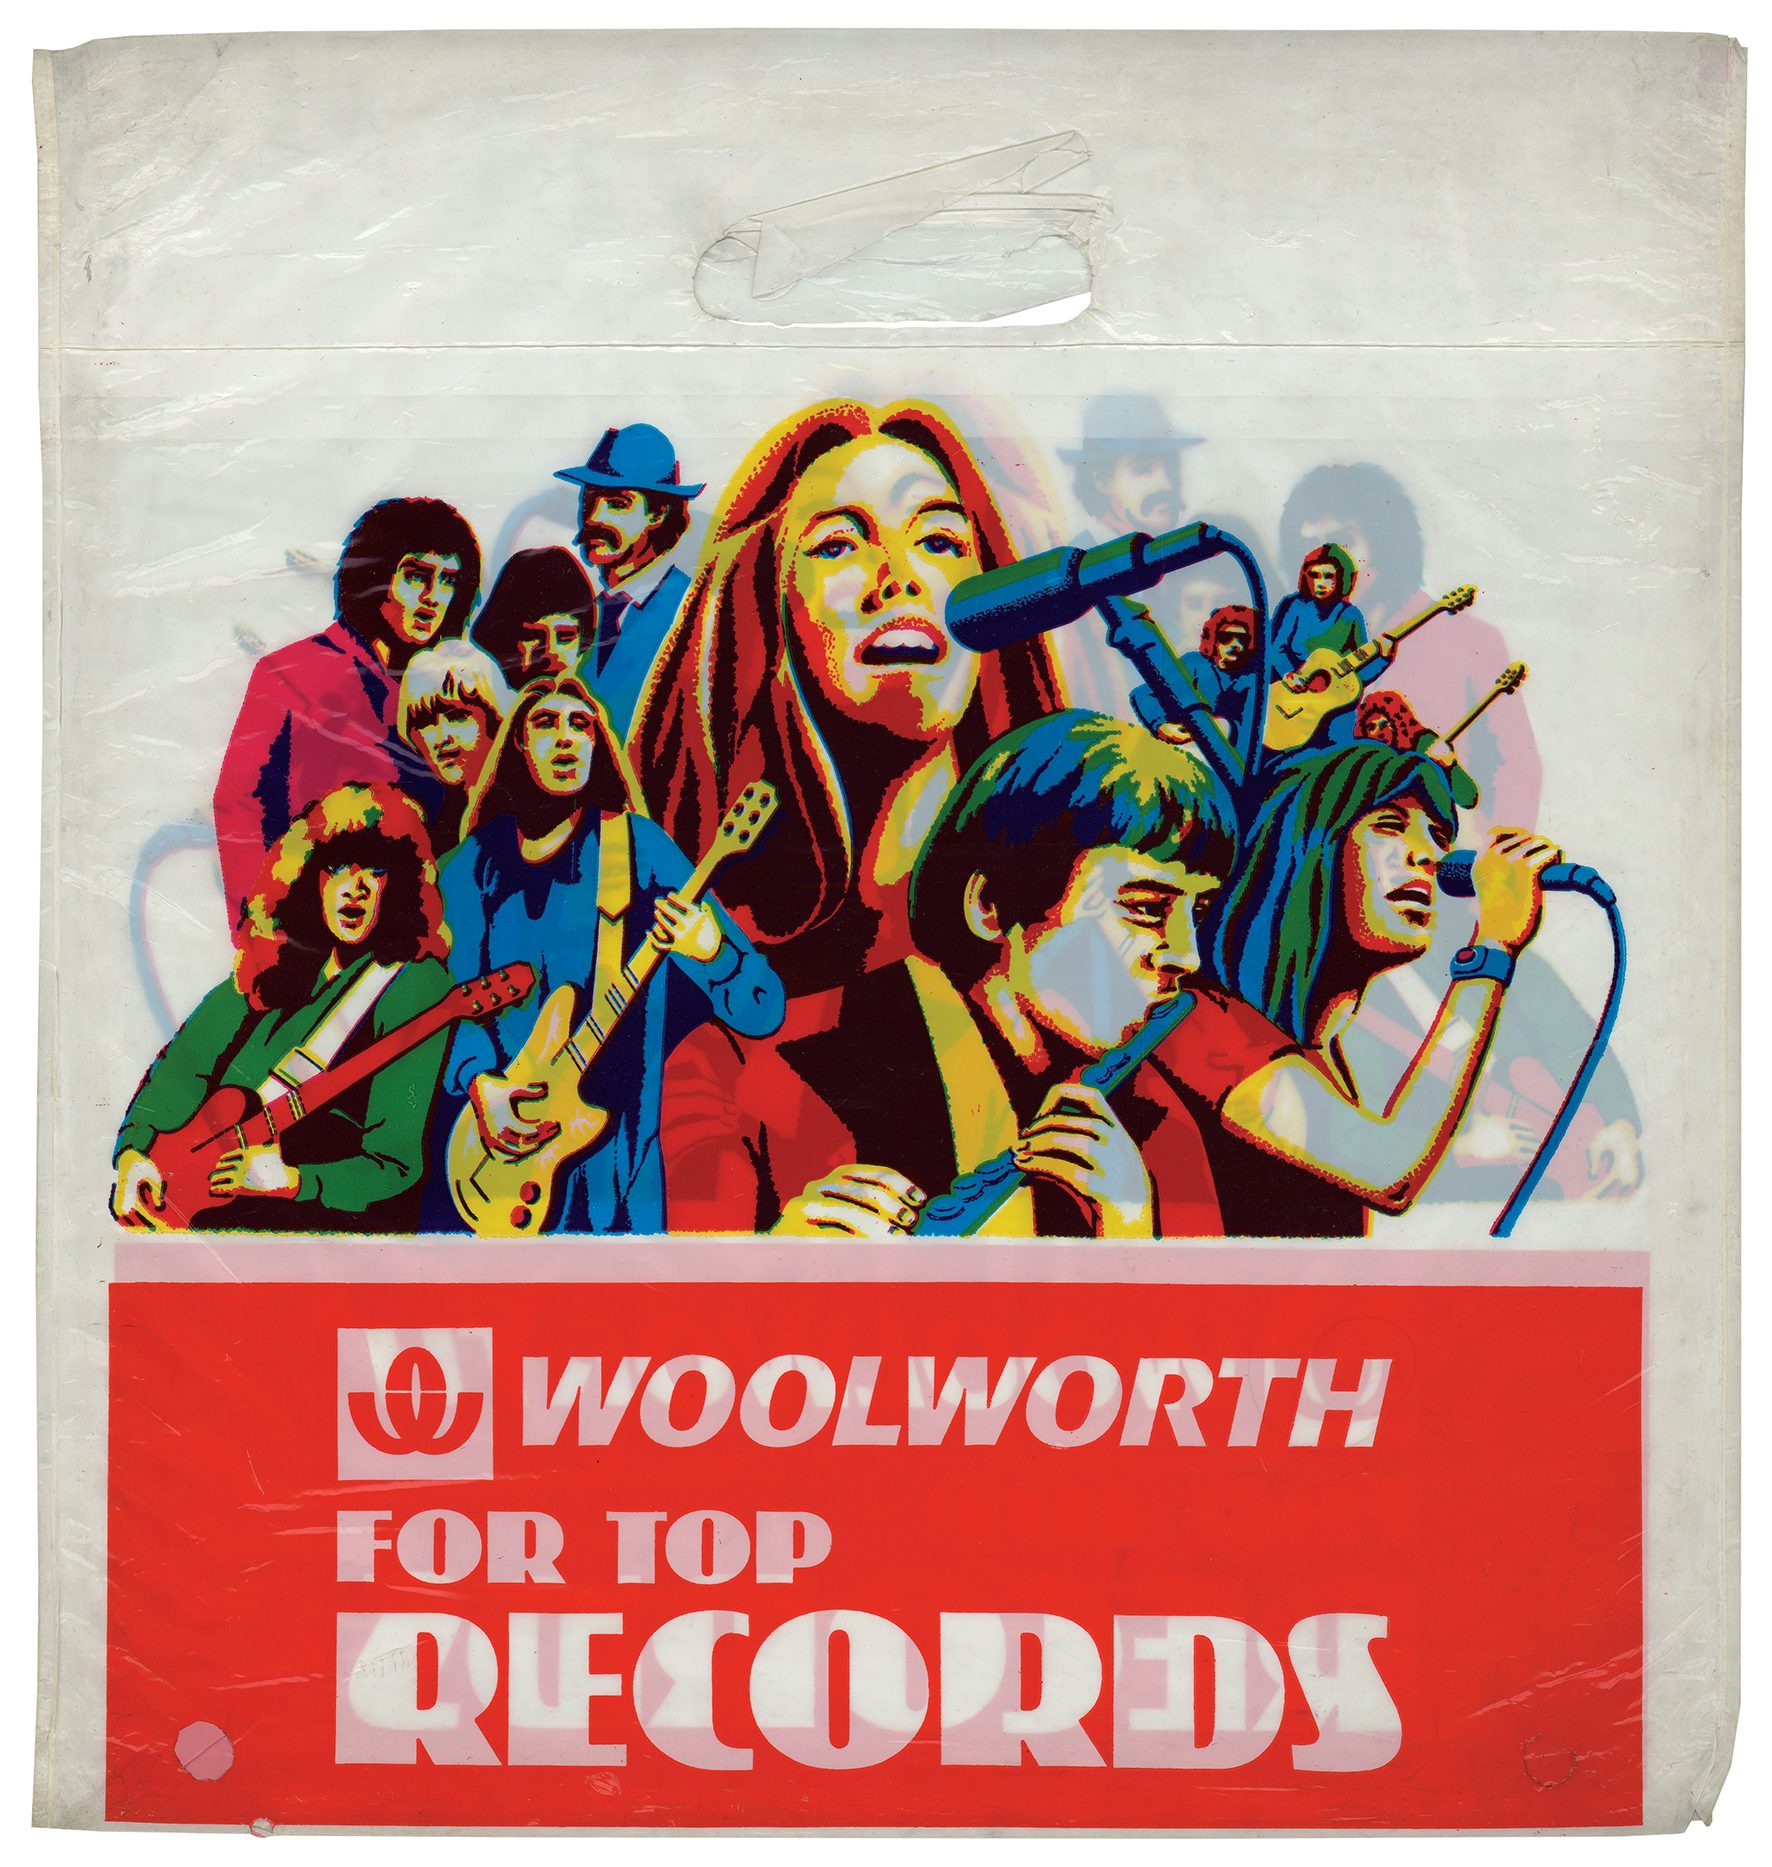 Woolworth AZ Record Shop Bags